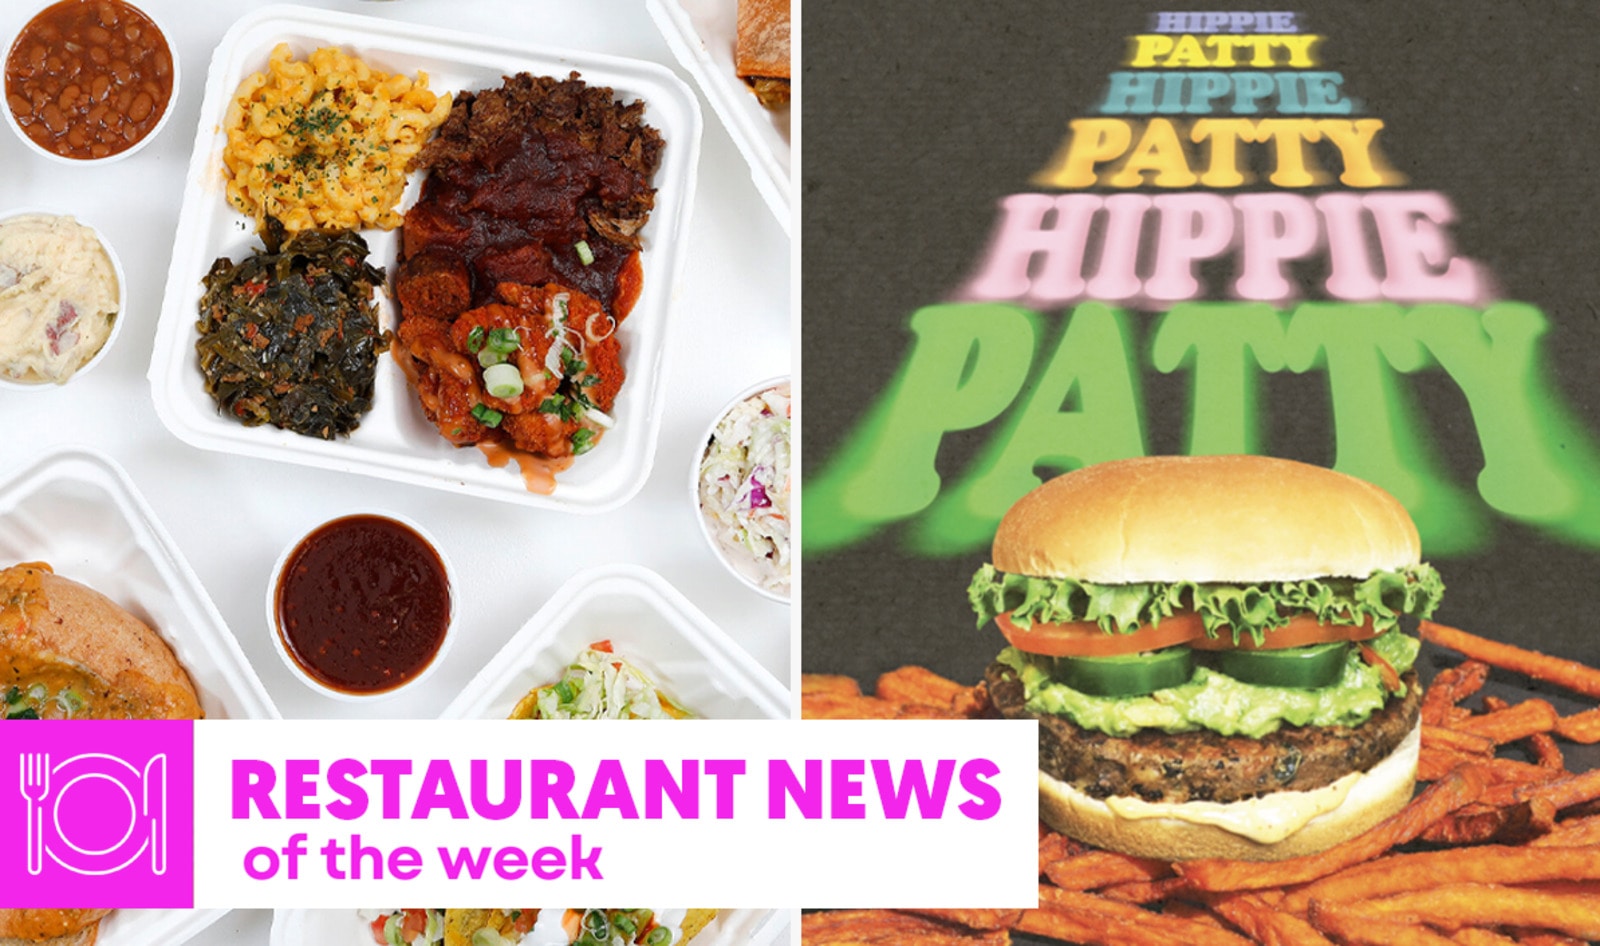 Vegan Restaurant News of the Week: Danny Glover's Favorite Meatless Barbecue, Hippie Burgers, and More